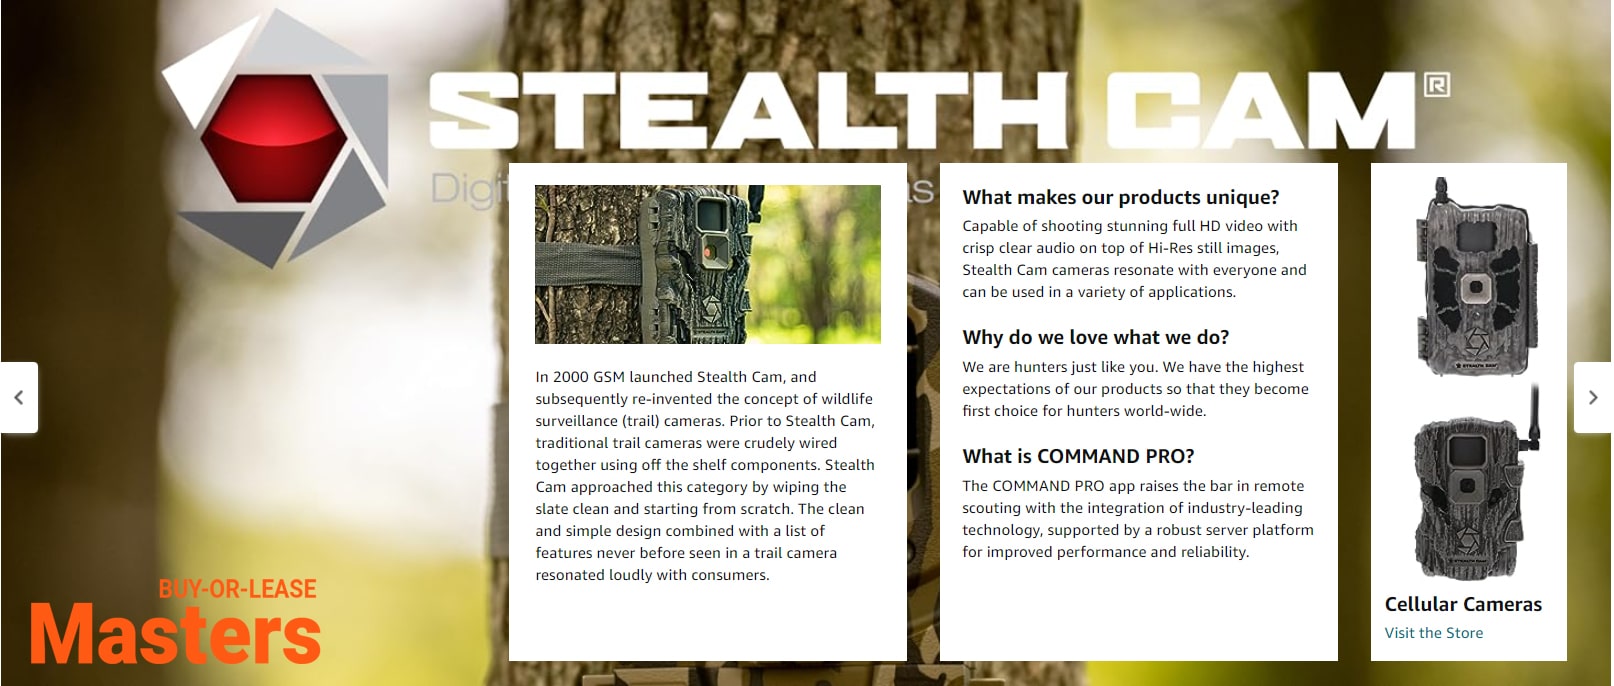 stealth-x-pro-cellular-trail-cameras-content (5)